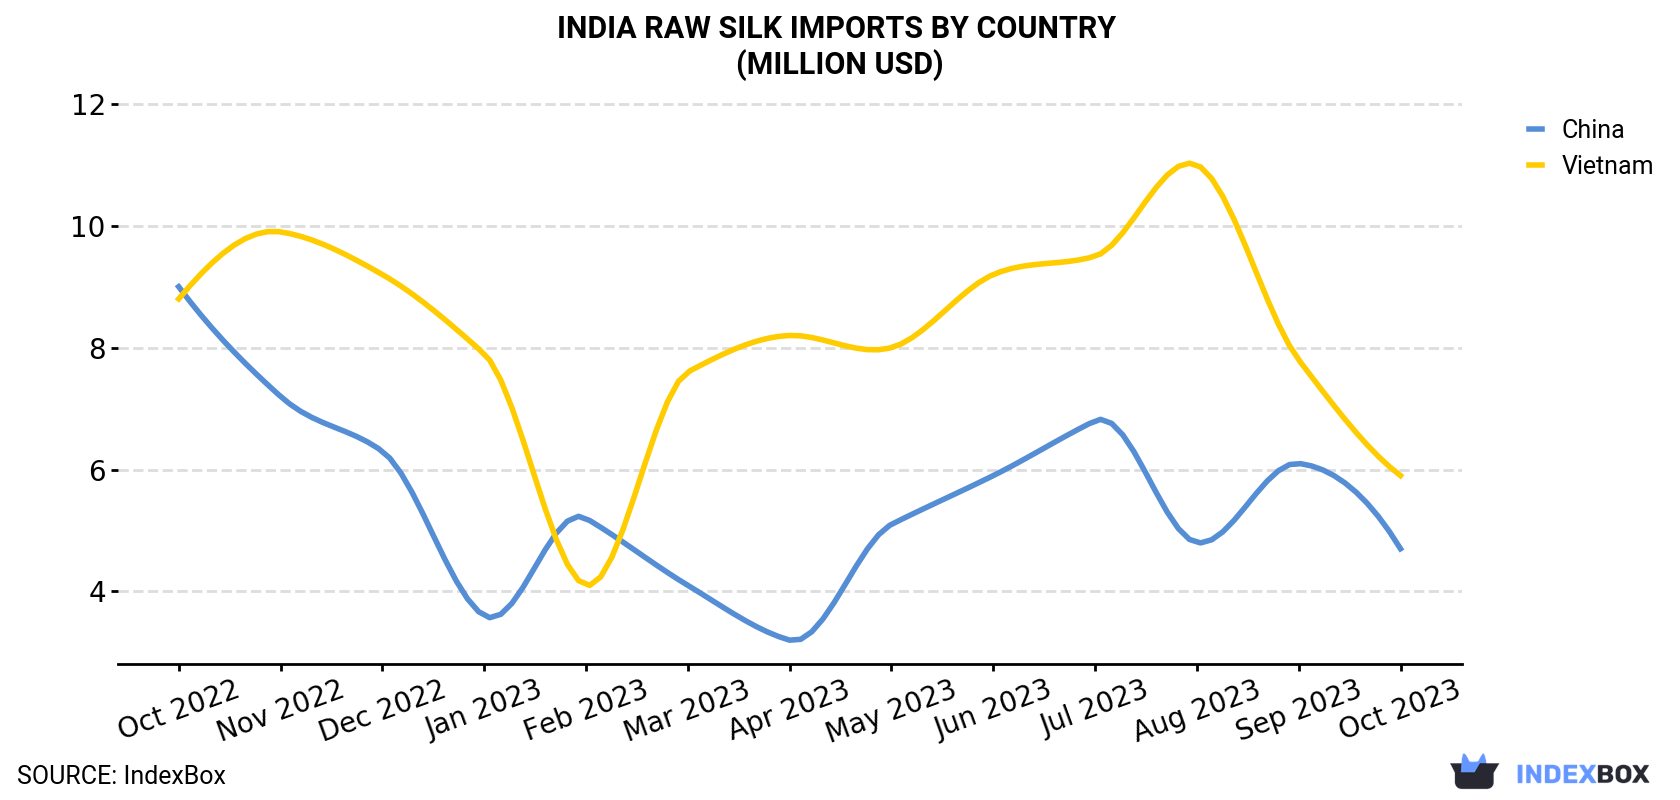 India Raw Silk Imports By Country (Million USD)